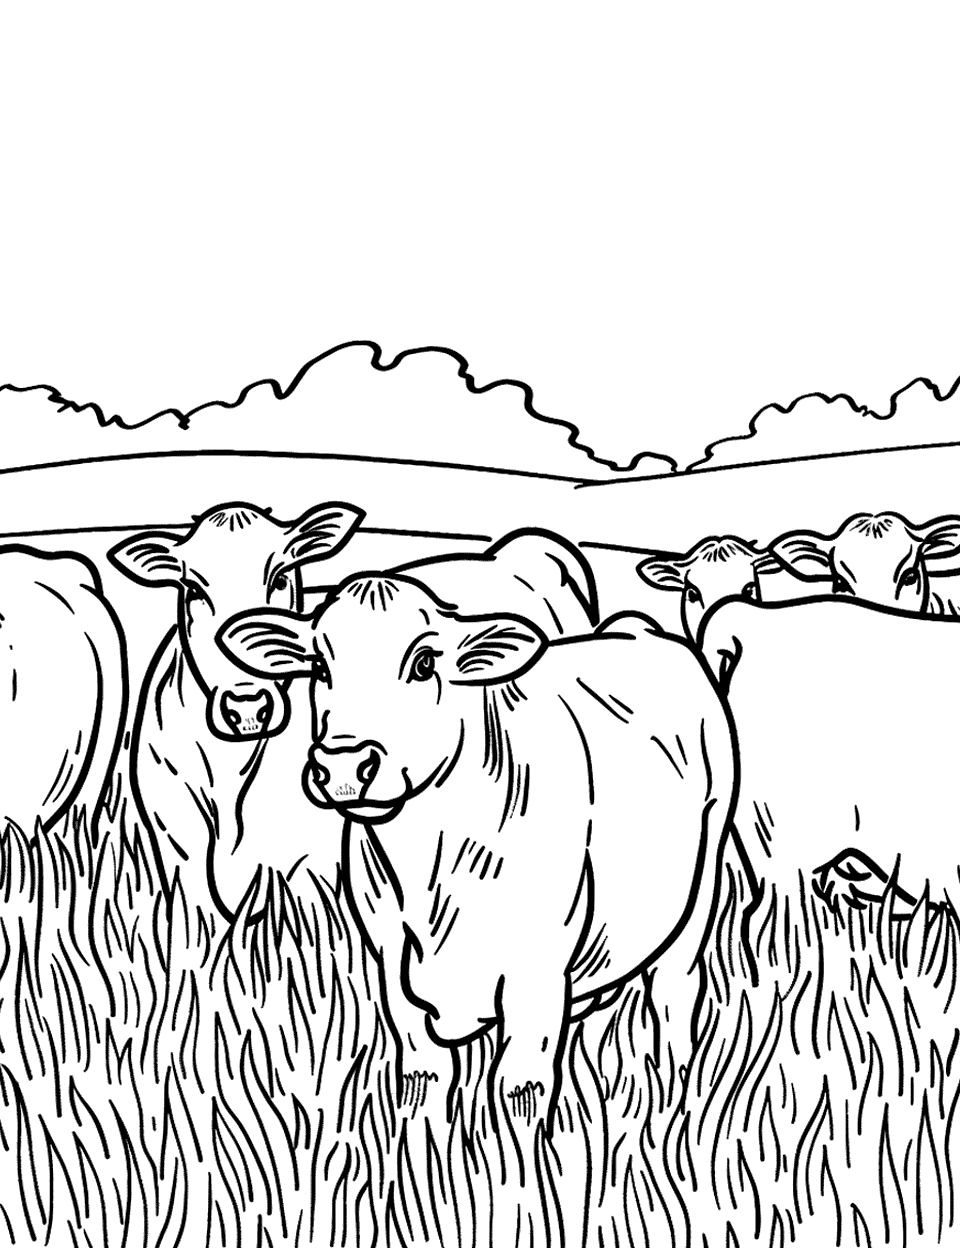 Cattle Standing Together Farm Animal Coloring Page - A group of cattle standing together in a field, showing the unity of the herd.